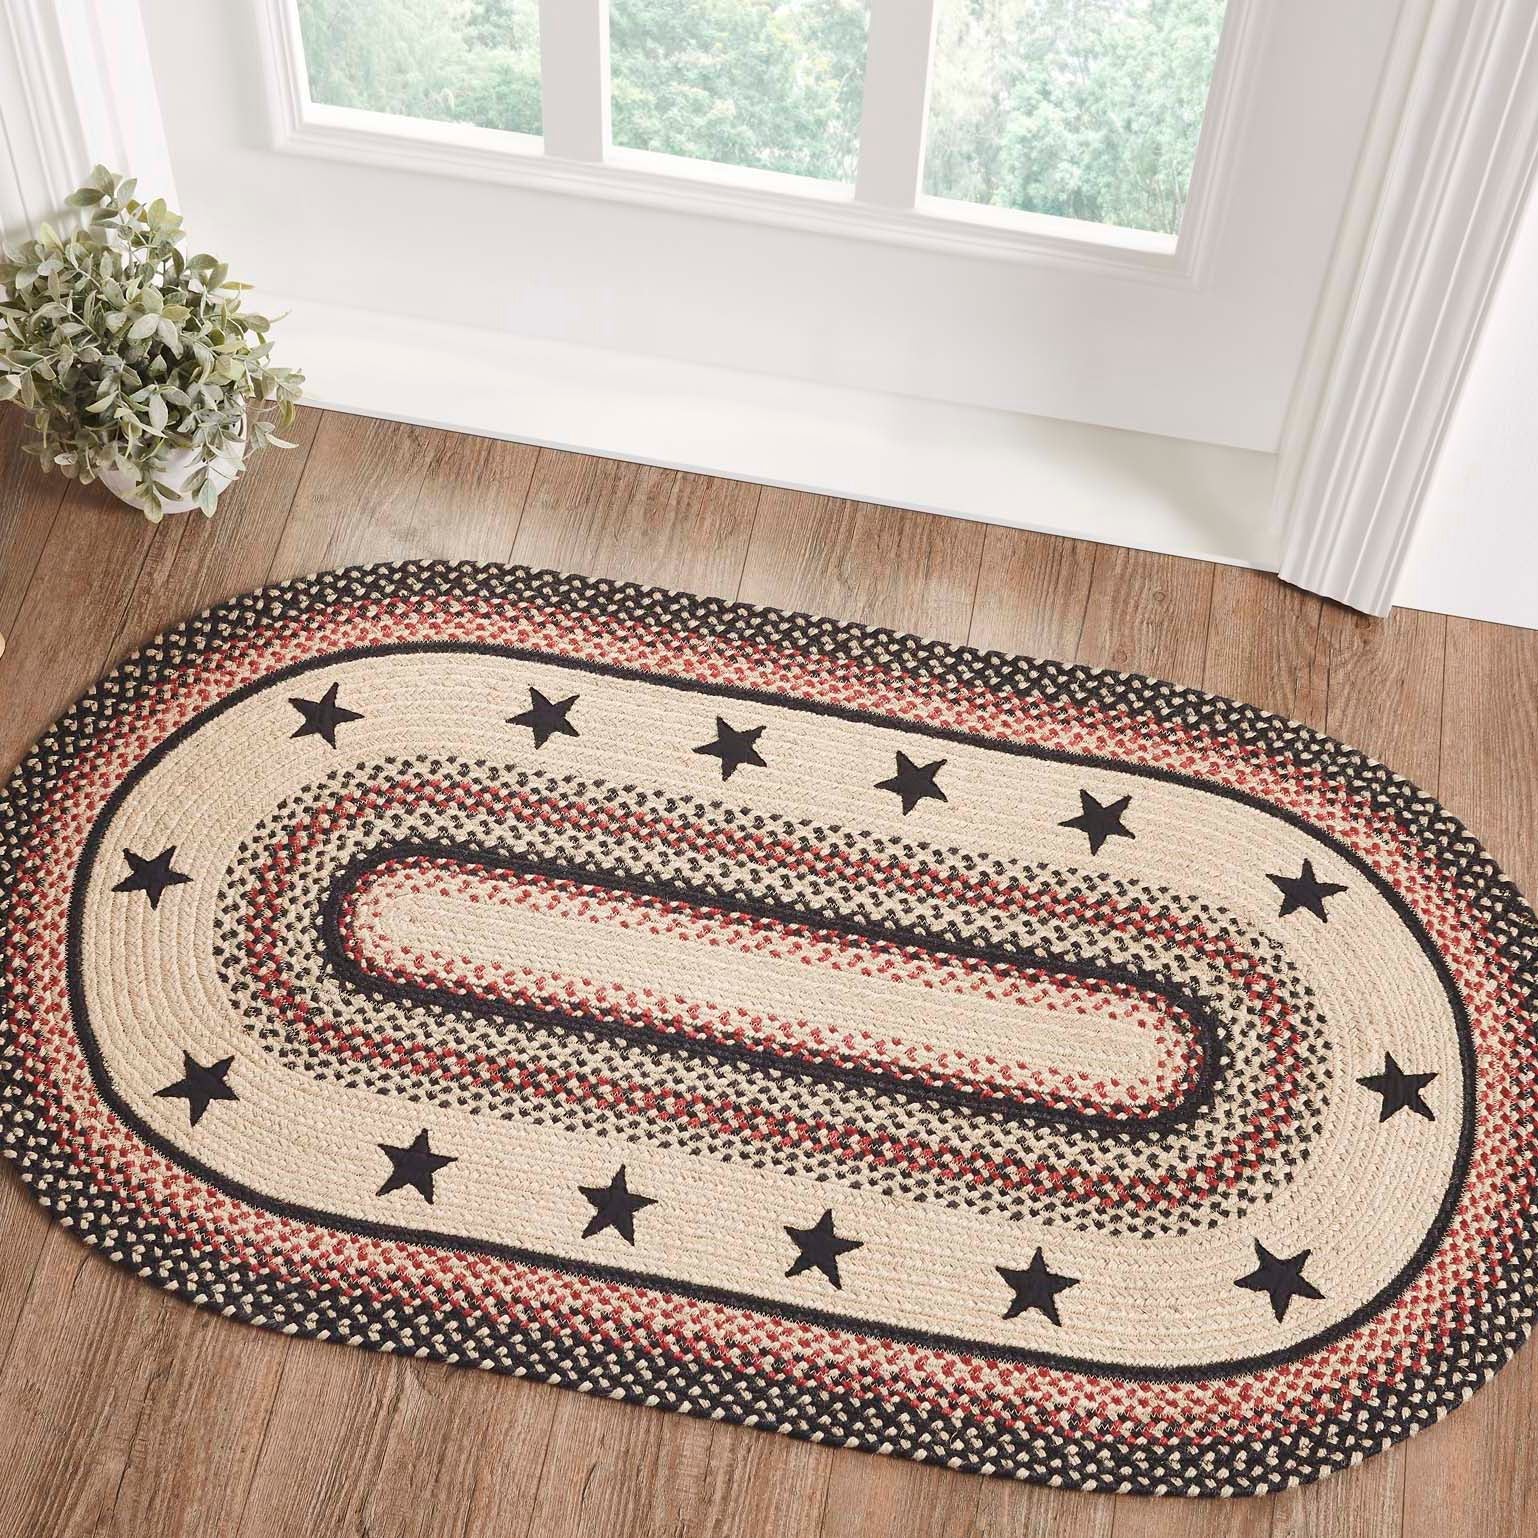 Colonial Star Jute Braided Rug Oval with Rug Pad 27"x48" VHC Brands